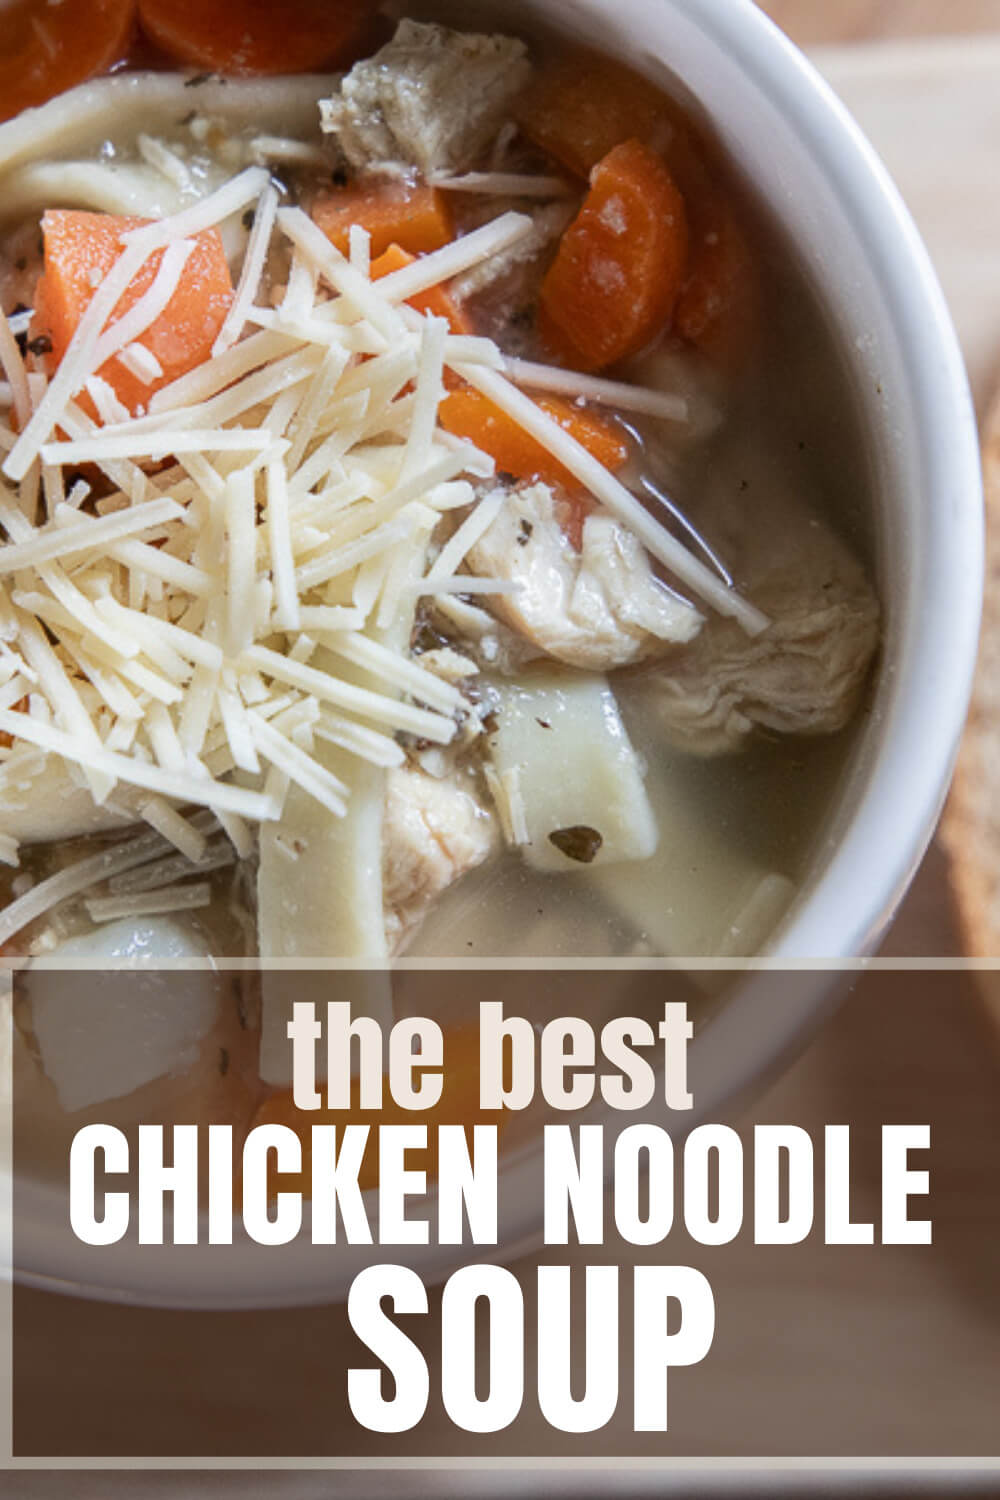 Amazing homemade chicken noodle soup recipe that is super easy to make and tastes so amazing!